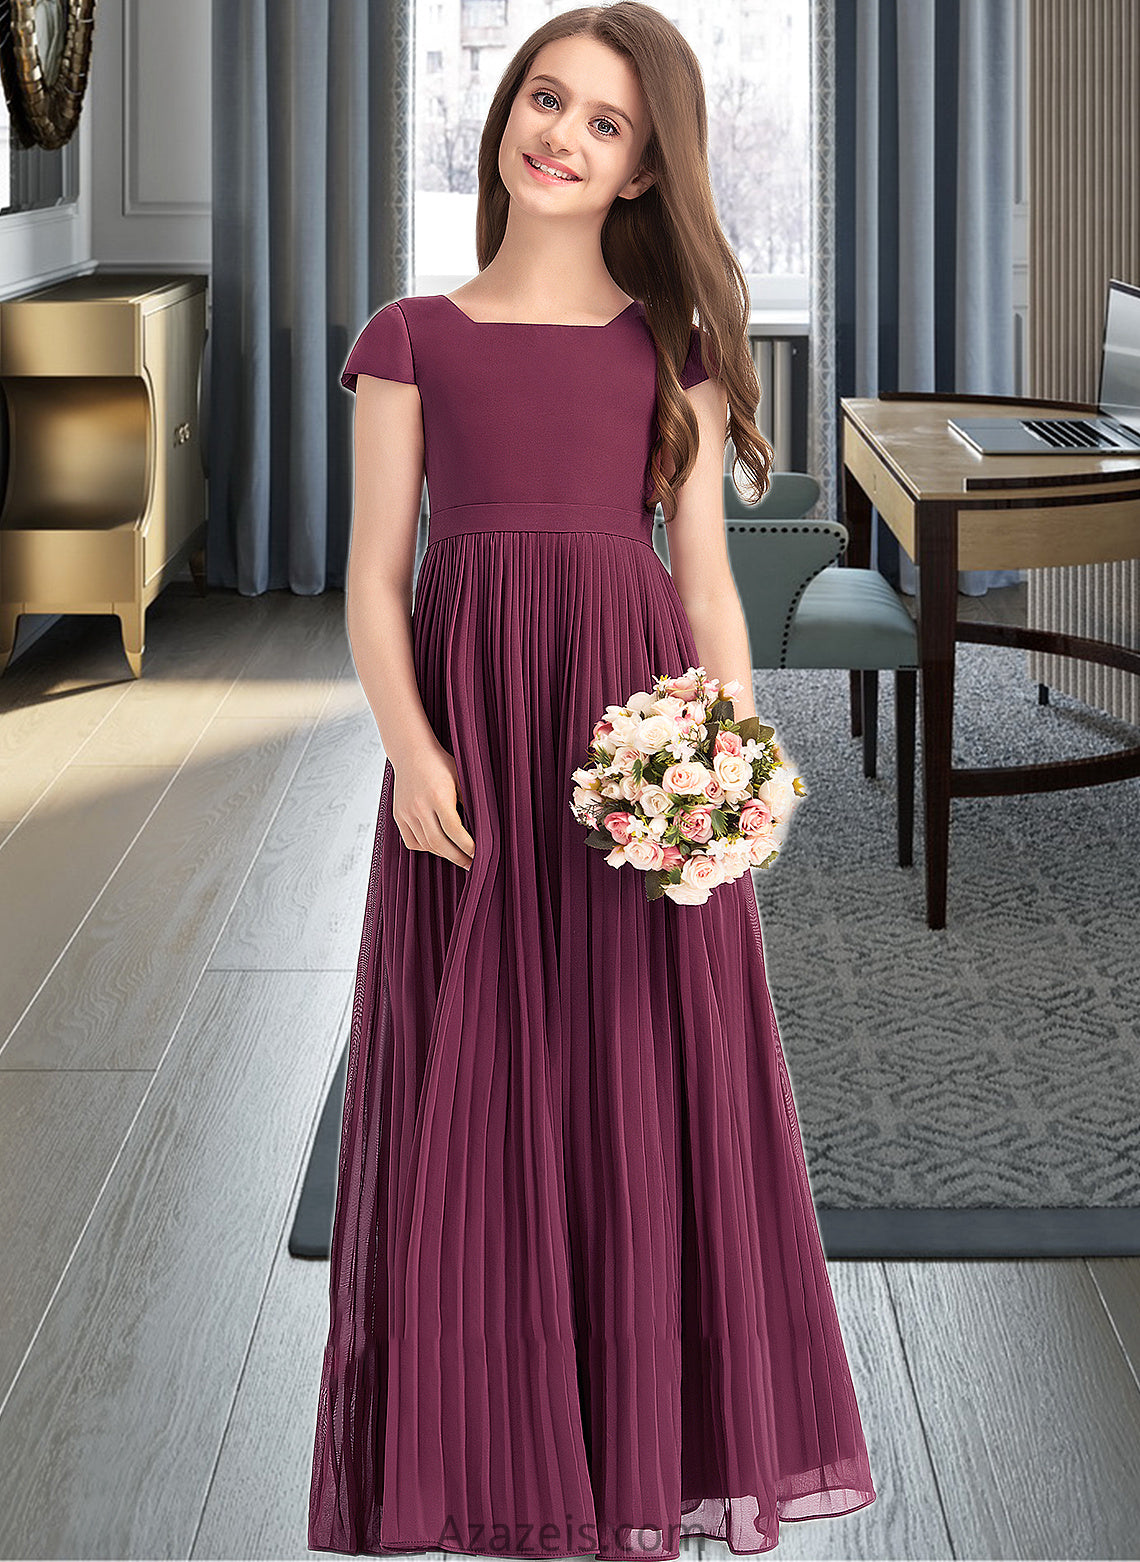 Laney A-Line Square Neckline Floor-Length Chiffon Junior Bridesmaid Dress With Lace Bow(s) Pleated DFP0013576